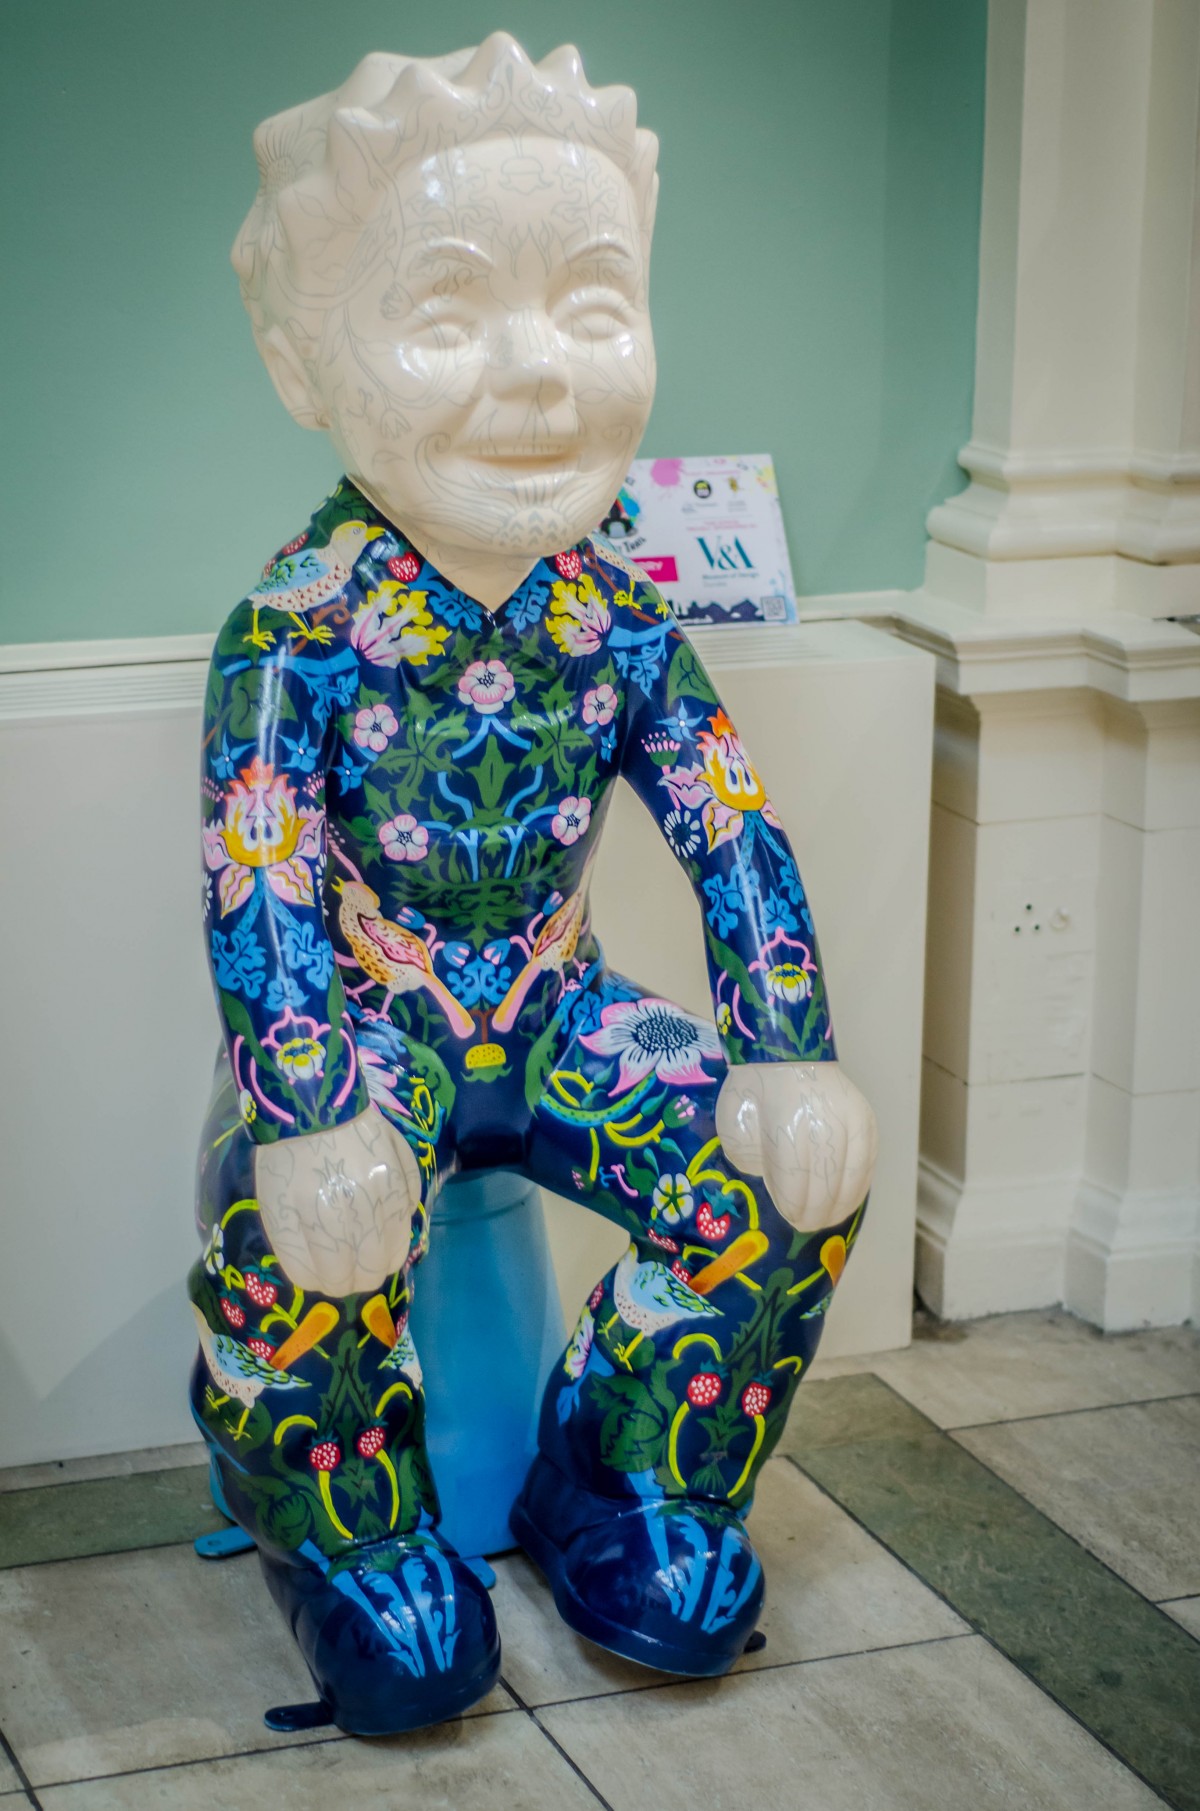 strawberry thief" By Ellen Brown
Freelance computer game artist and graphic designer Ellen Brown created this Wullie with inspiration from a previous project. Yuo can see this hippy Wullie in Perth Musuem and Art Gallery.